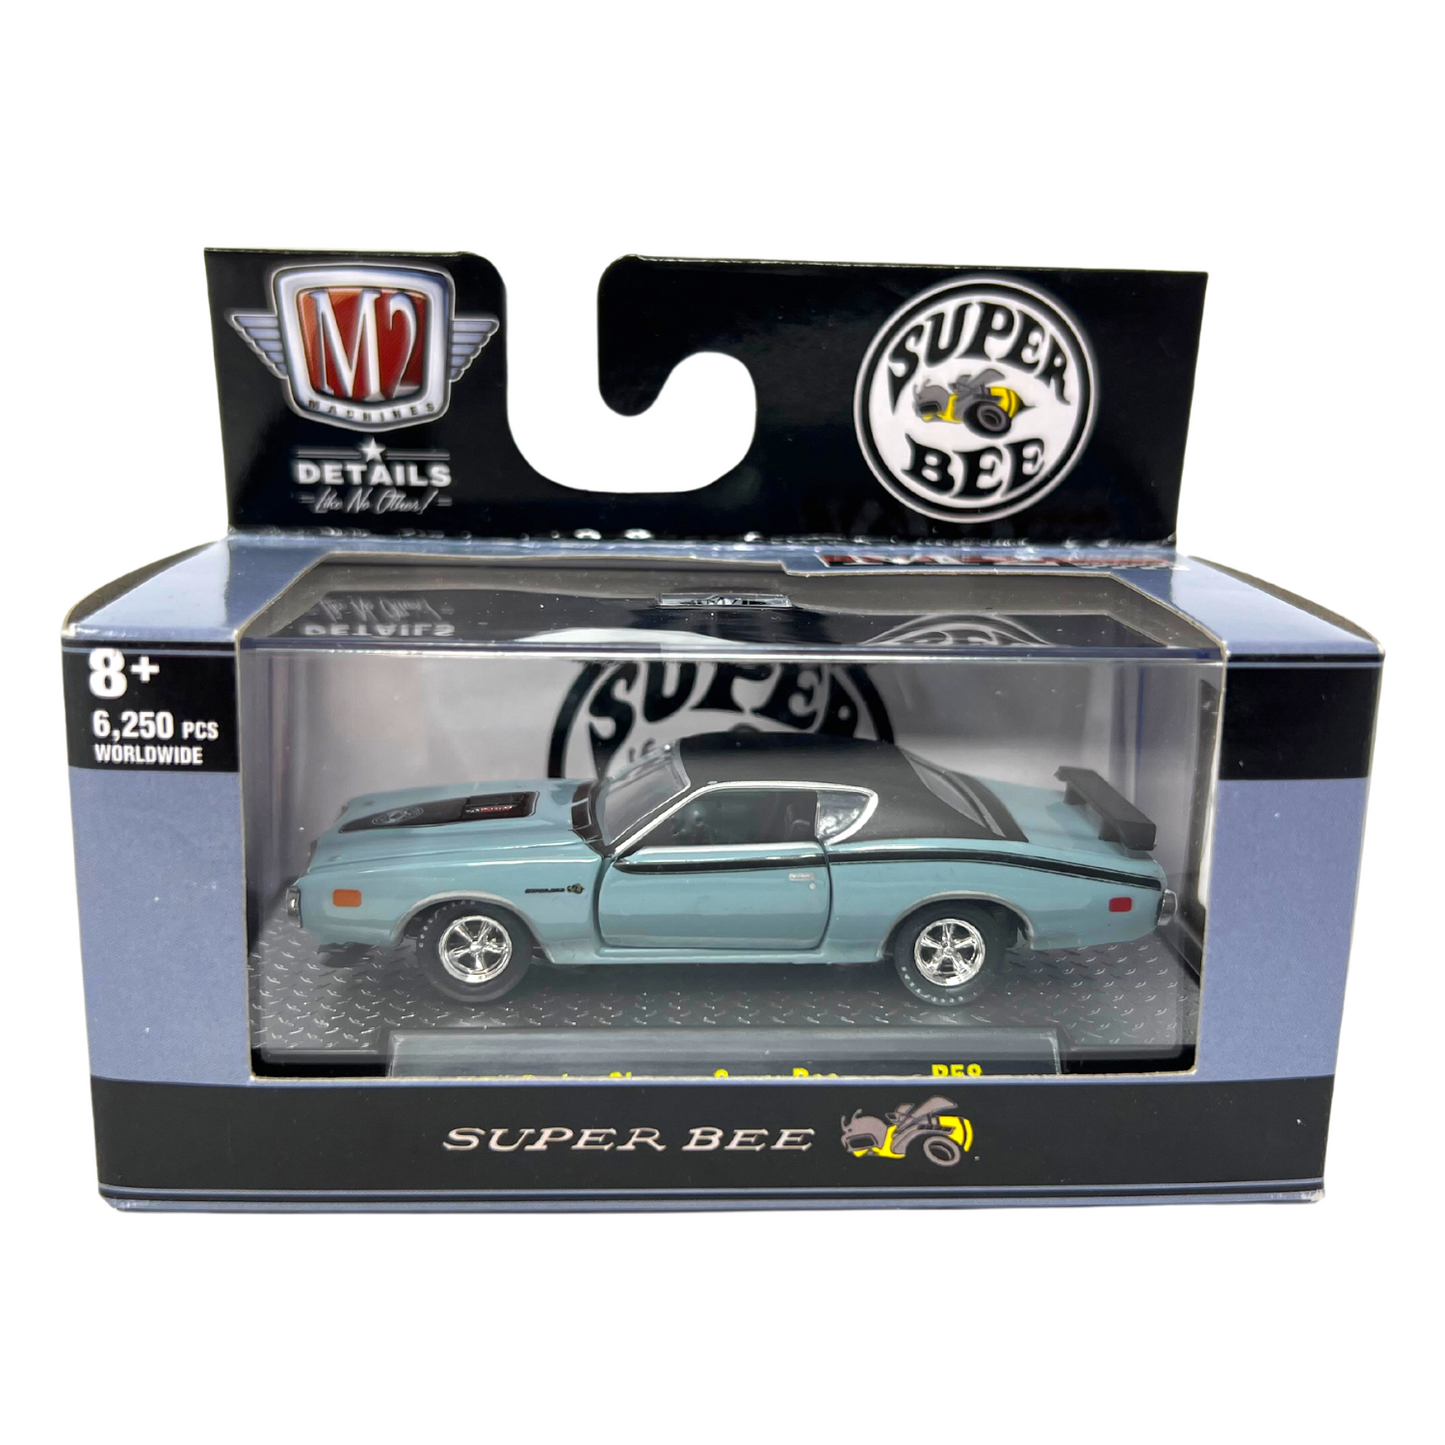 M2 Machines Super Bee 1971 Dodge Charger Super Bee R58 1:64 Diecast